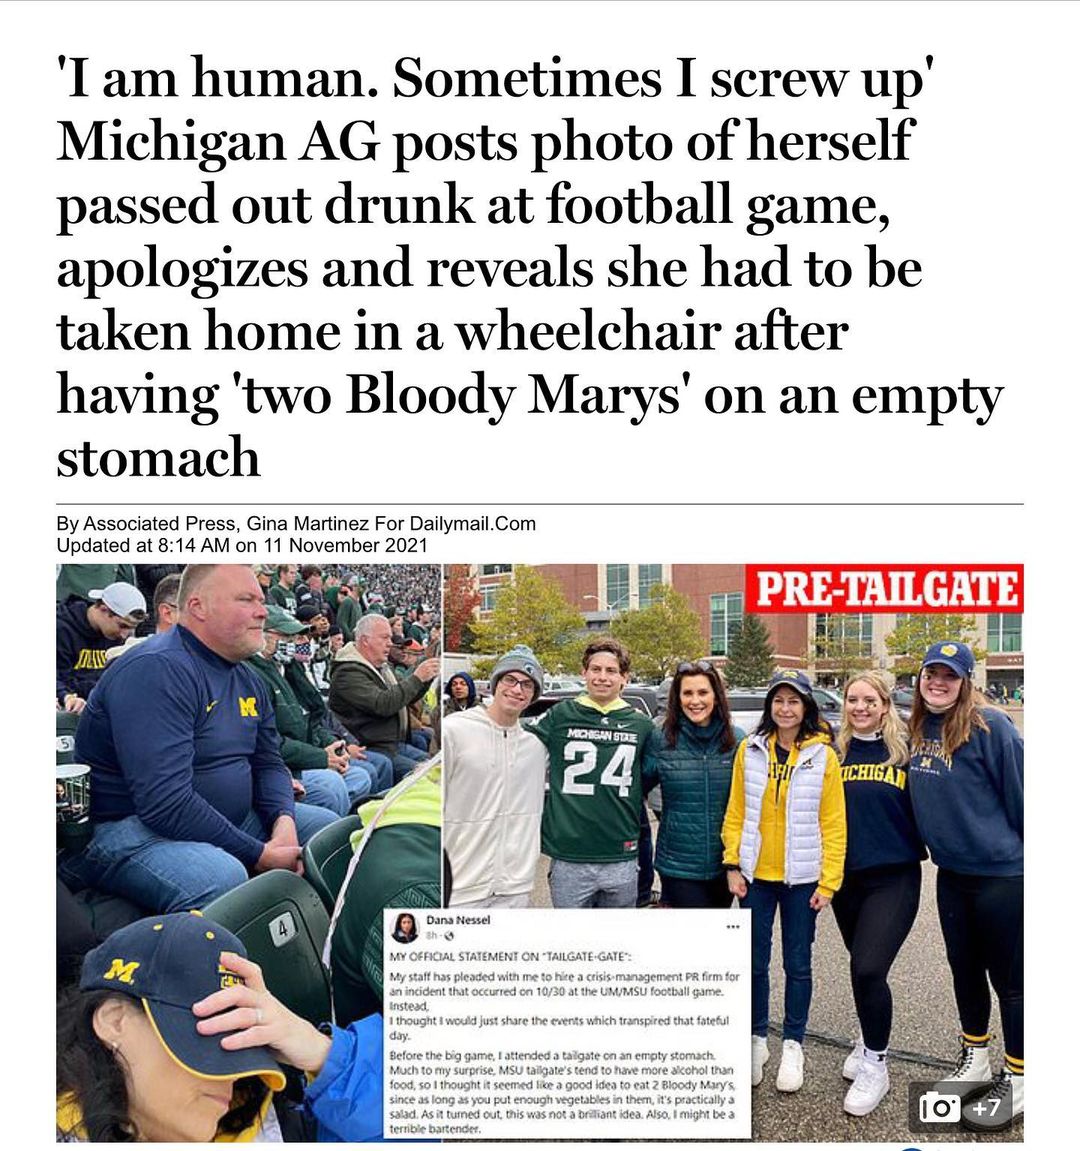 You are currently viewing ‘I am human. Sometimes I screw up’ Michigan AG posts photo of herself passed out drunk at football game, apologizes and reveals she had to be taken home in a wheelchair after having ‘two Bloody Marys’ on an empty stomach